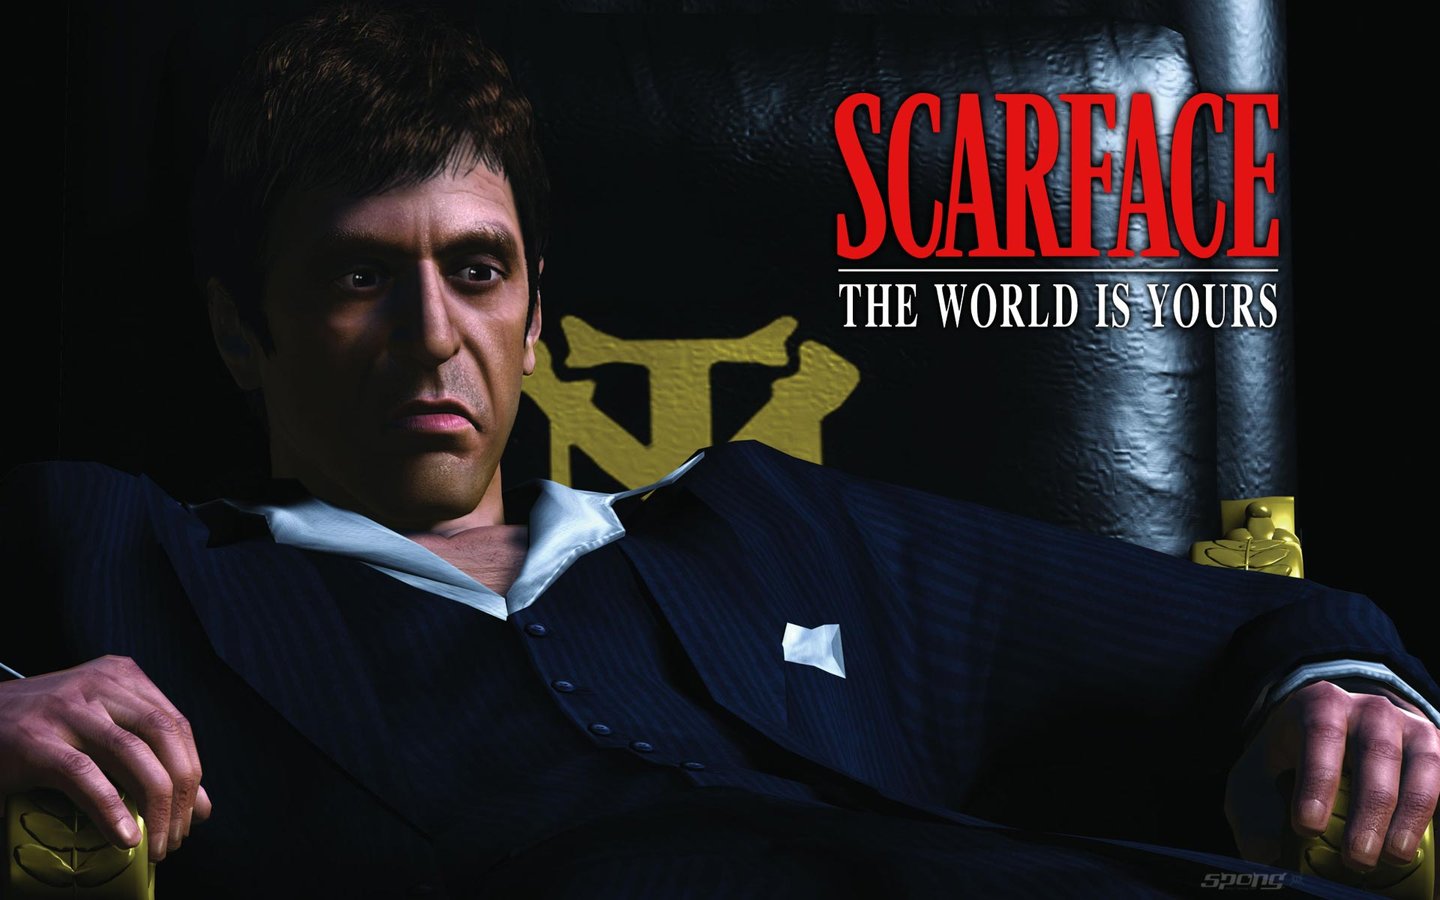 Wallpaper Scarface The World Is Yours Ps2 Of